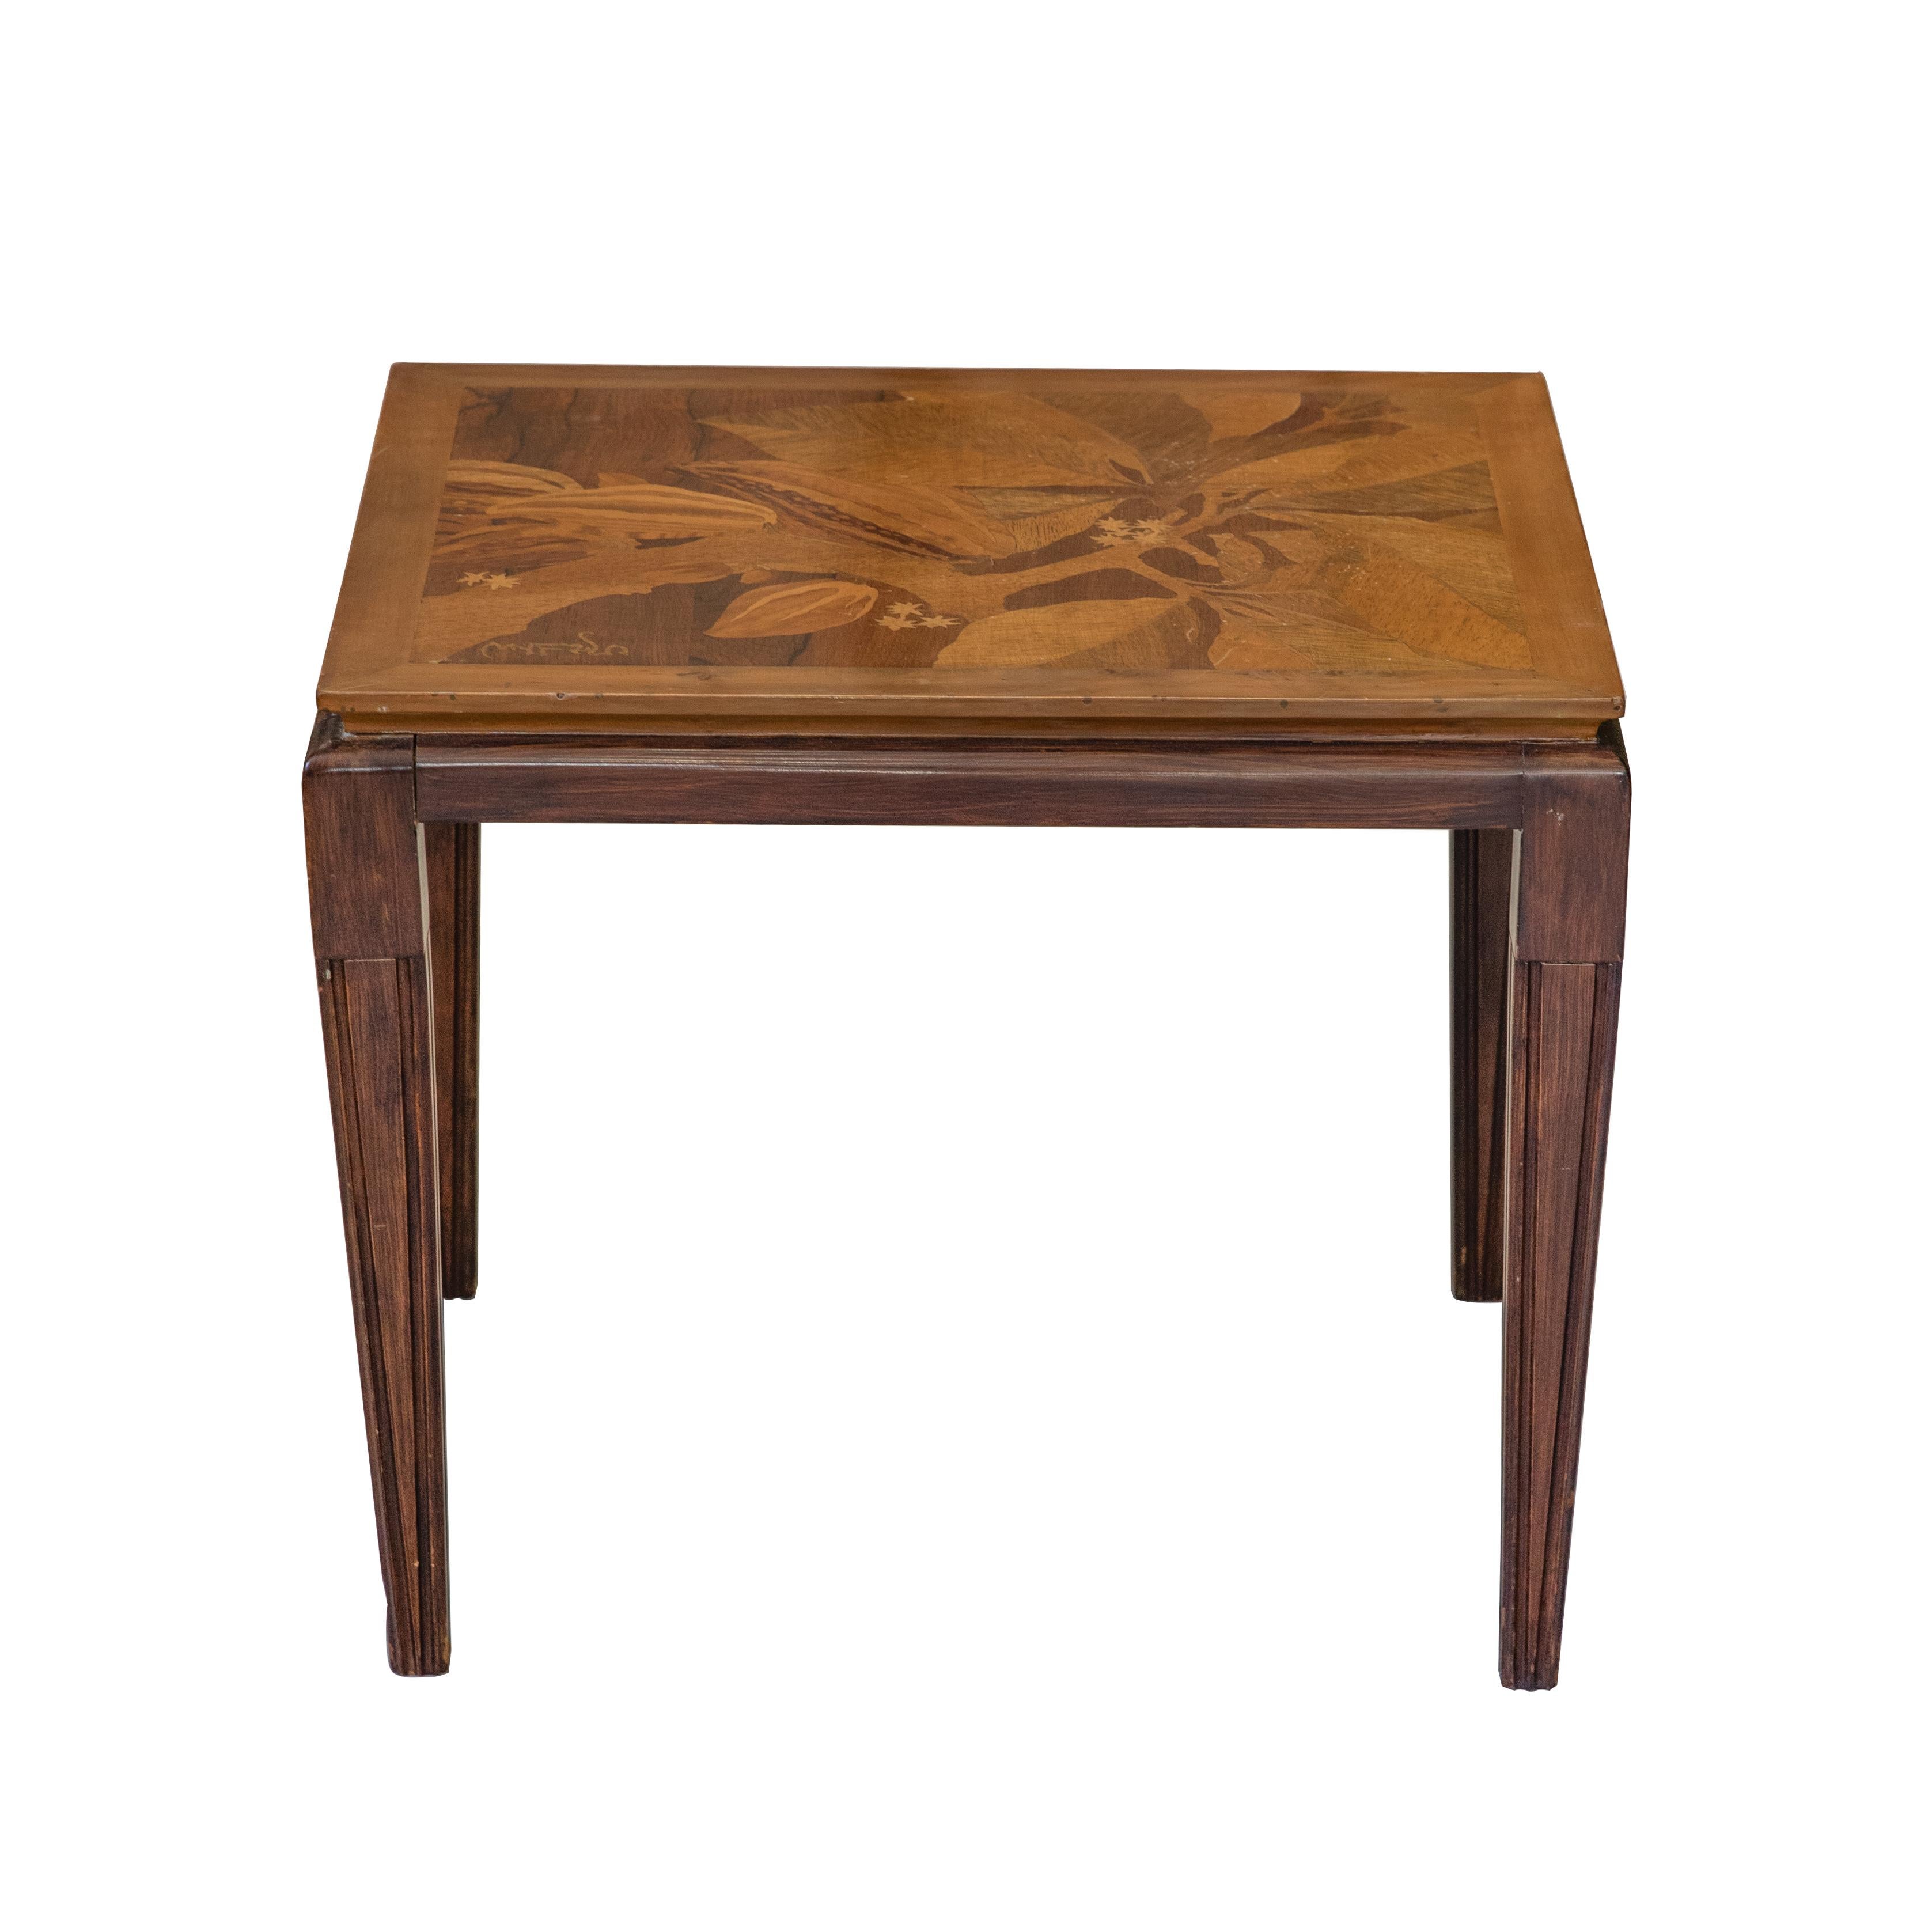 Inlay Gallé Inlaid Early 20th Century Art Nouveau Side Table with Floral Motifs